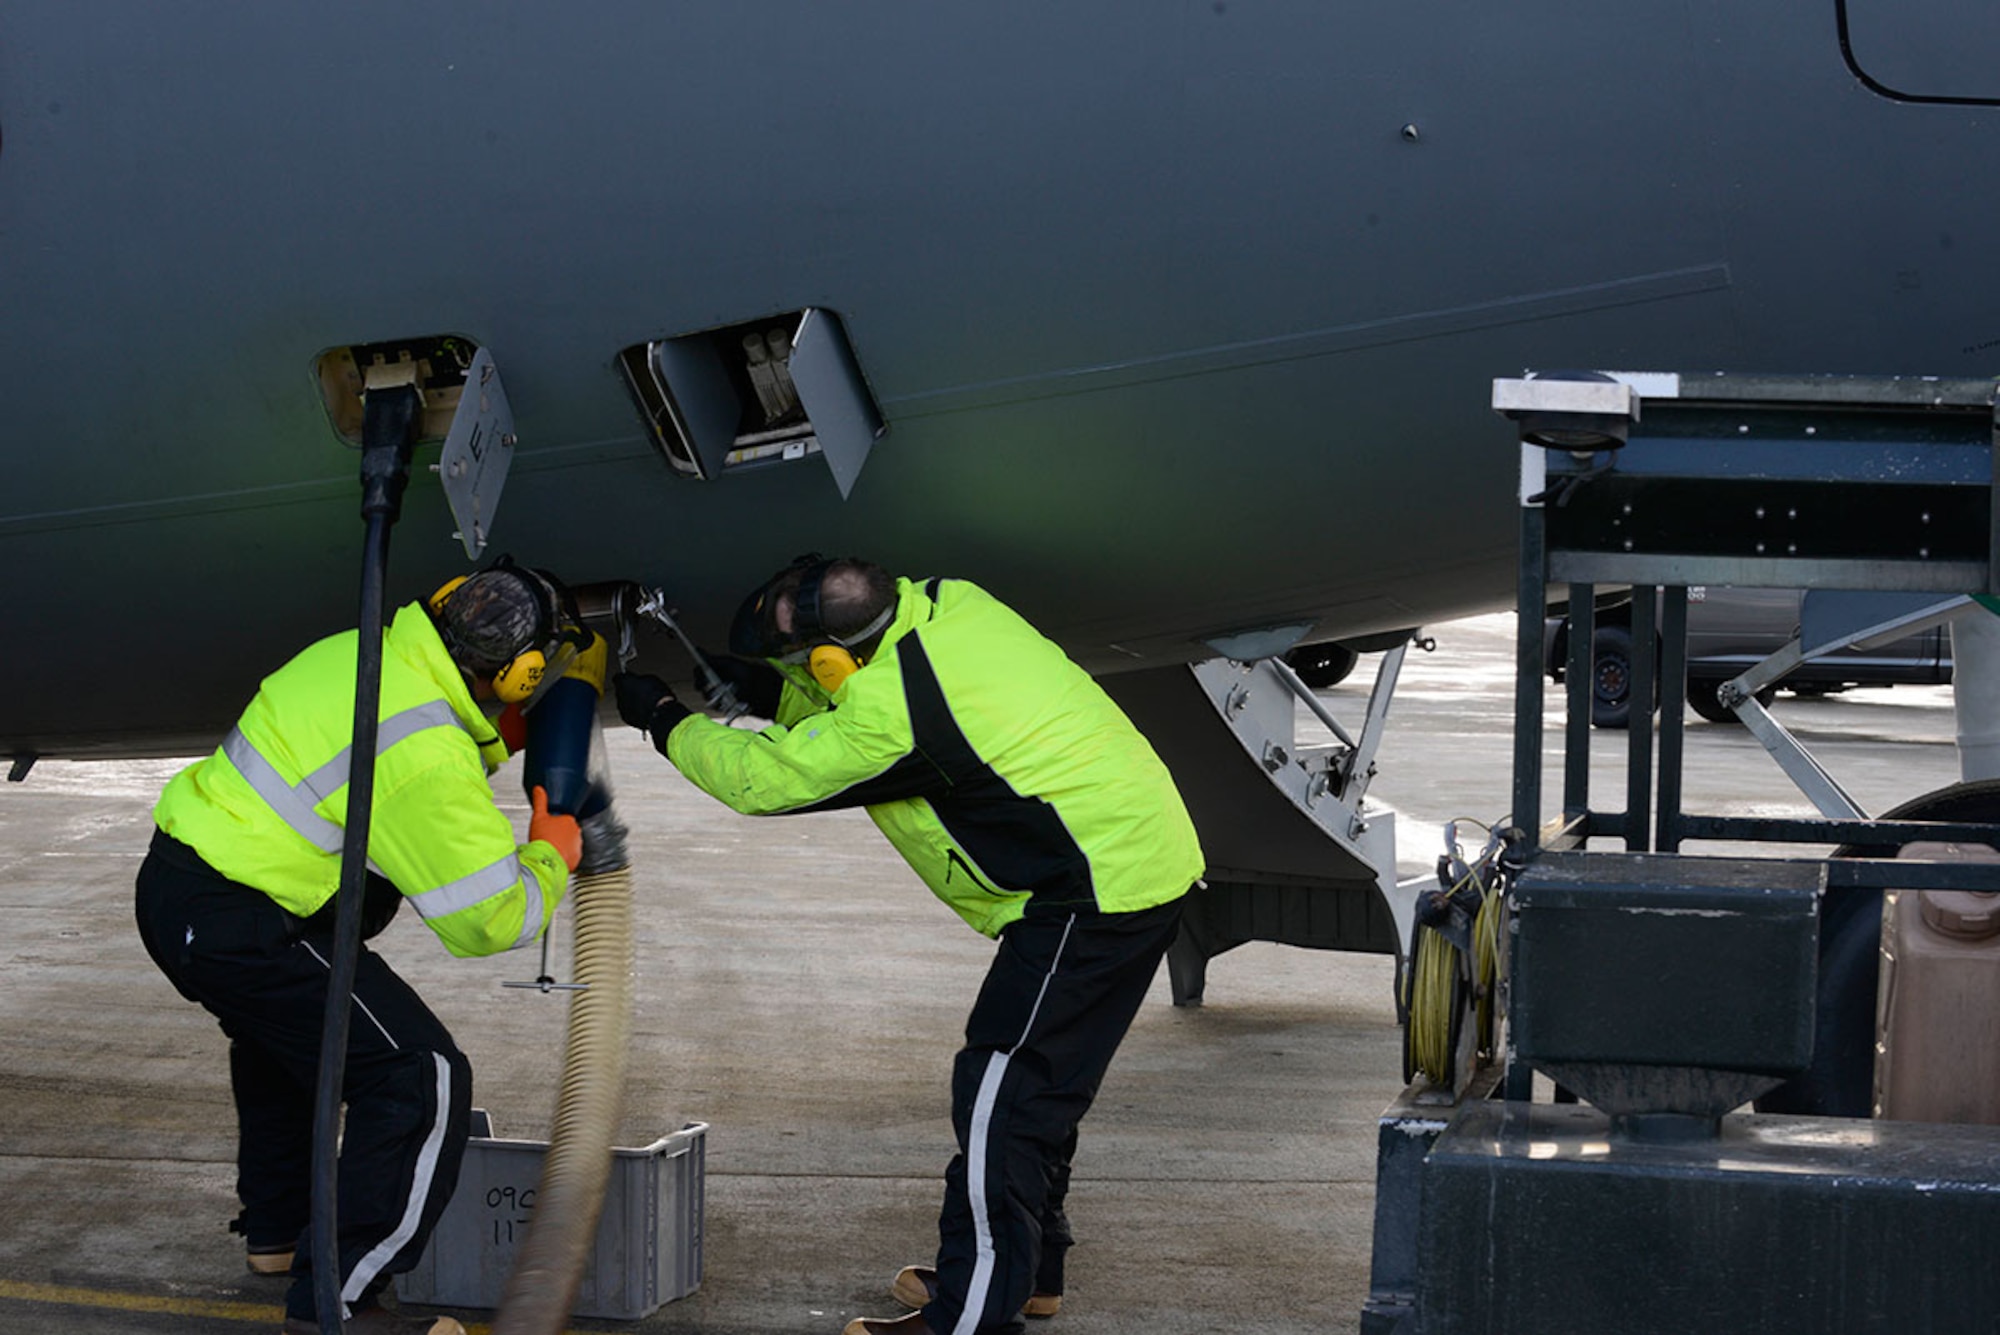 Jeffrey Zook, left, and Lewis Come, right, attach a drainage tube to a C-17 Globemaster III at Joint Base Elmendorf-Richardson, to remove the waste from the aircraft’s lavatory. Fleet services not only cleans and services all aircraft lavatories, but also removes trash on board and prepares all outbound aircraft with pillows, blankets and other necessary items. Zook is a fleet services vehicle operator and Come is the fleet services supervisor, both are with the 732nd Air Mobility Squadron. (U.S. Air Force photo by Airman Valerie Monroy)